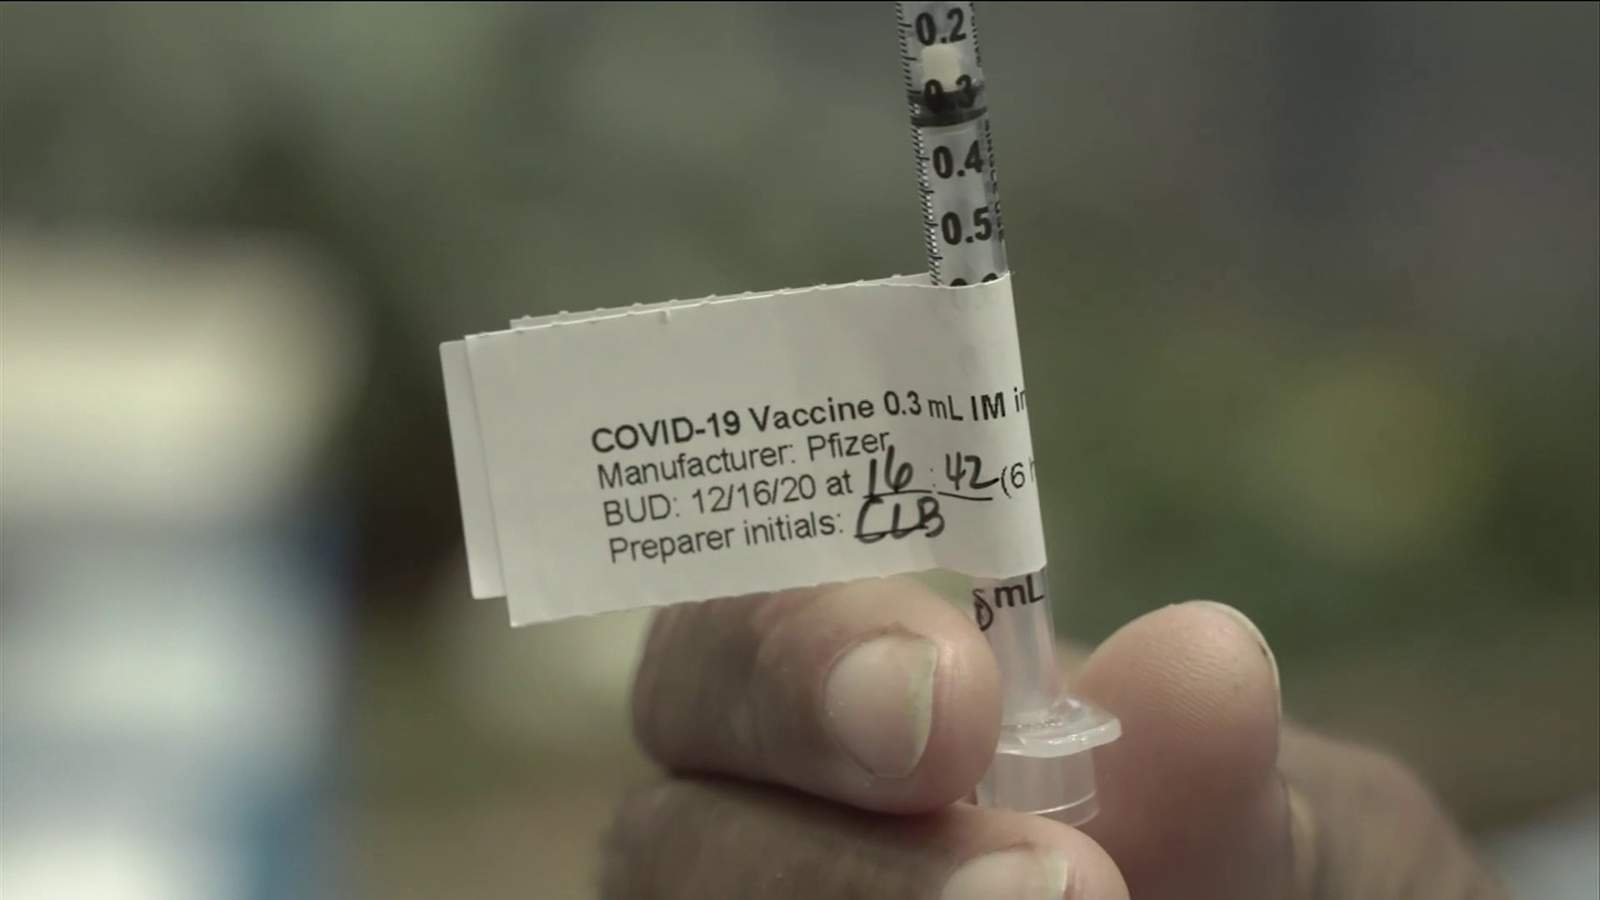 How Jacksonville helped contribute in clinical trials for COVID-19 vaccines